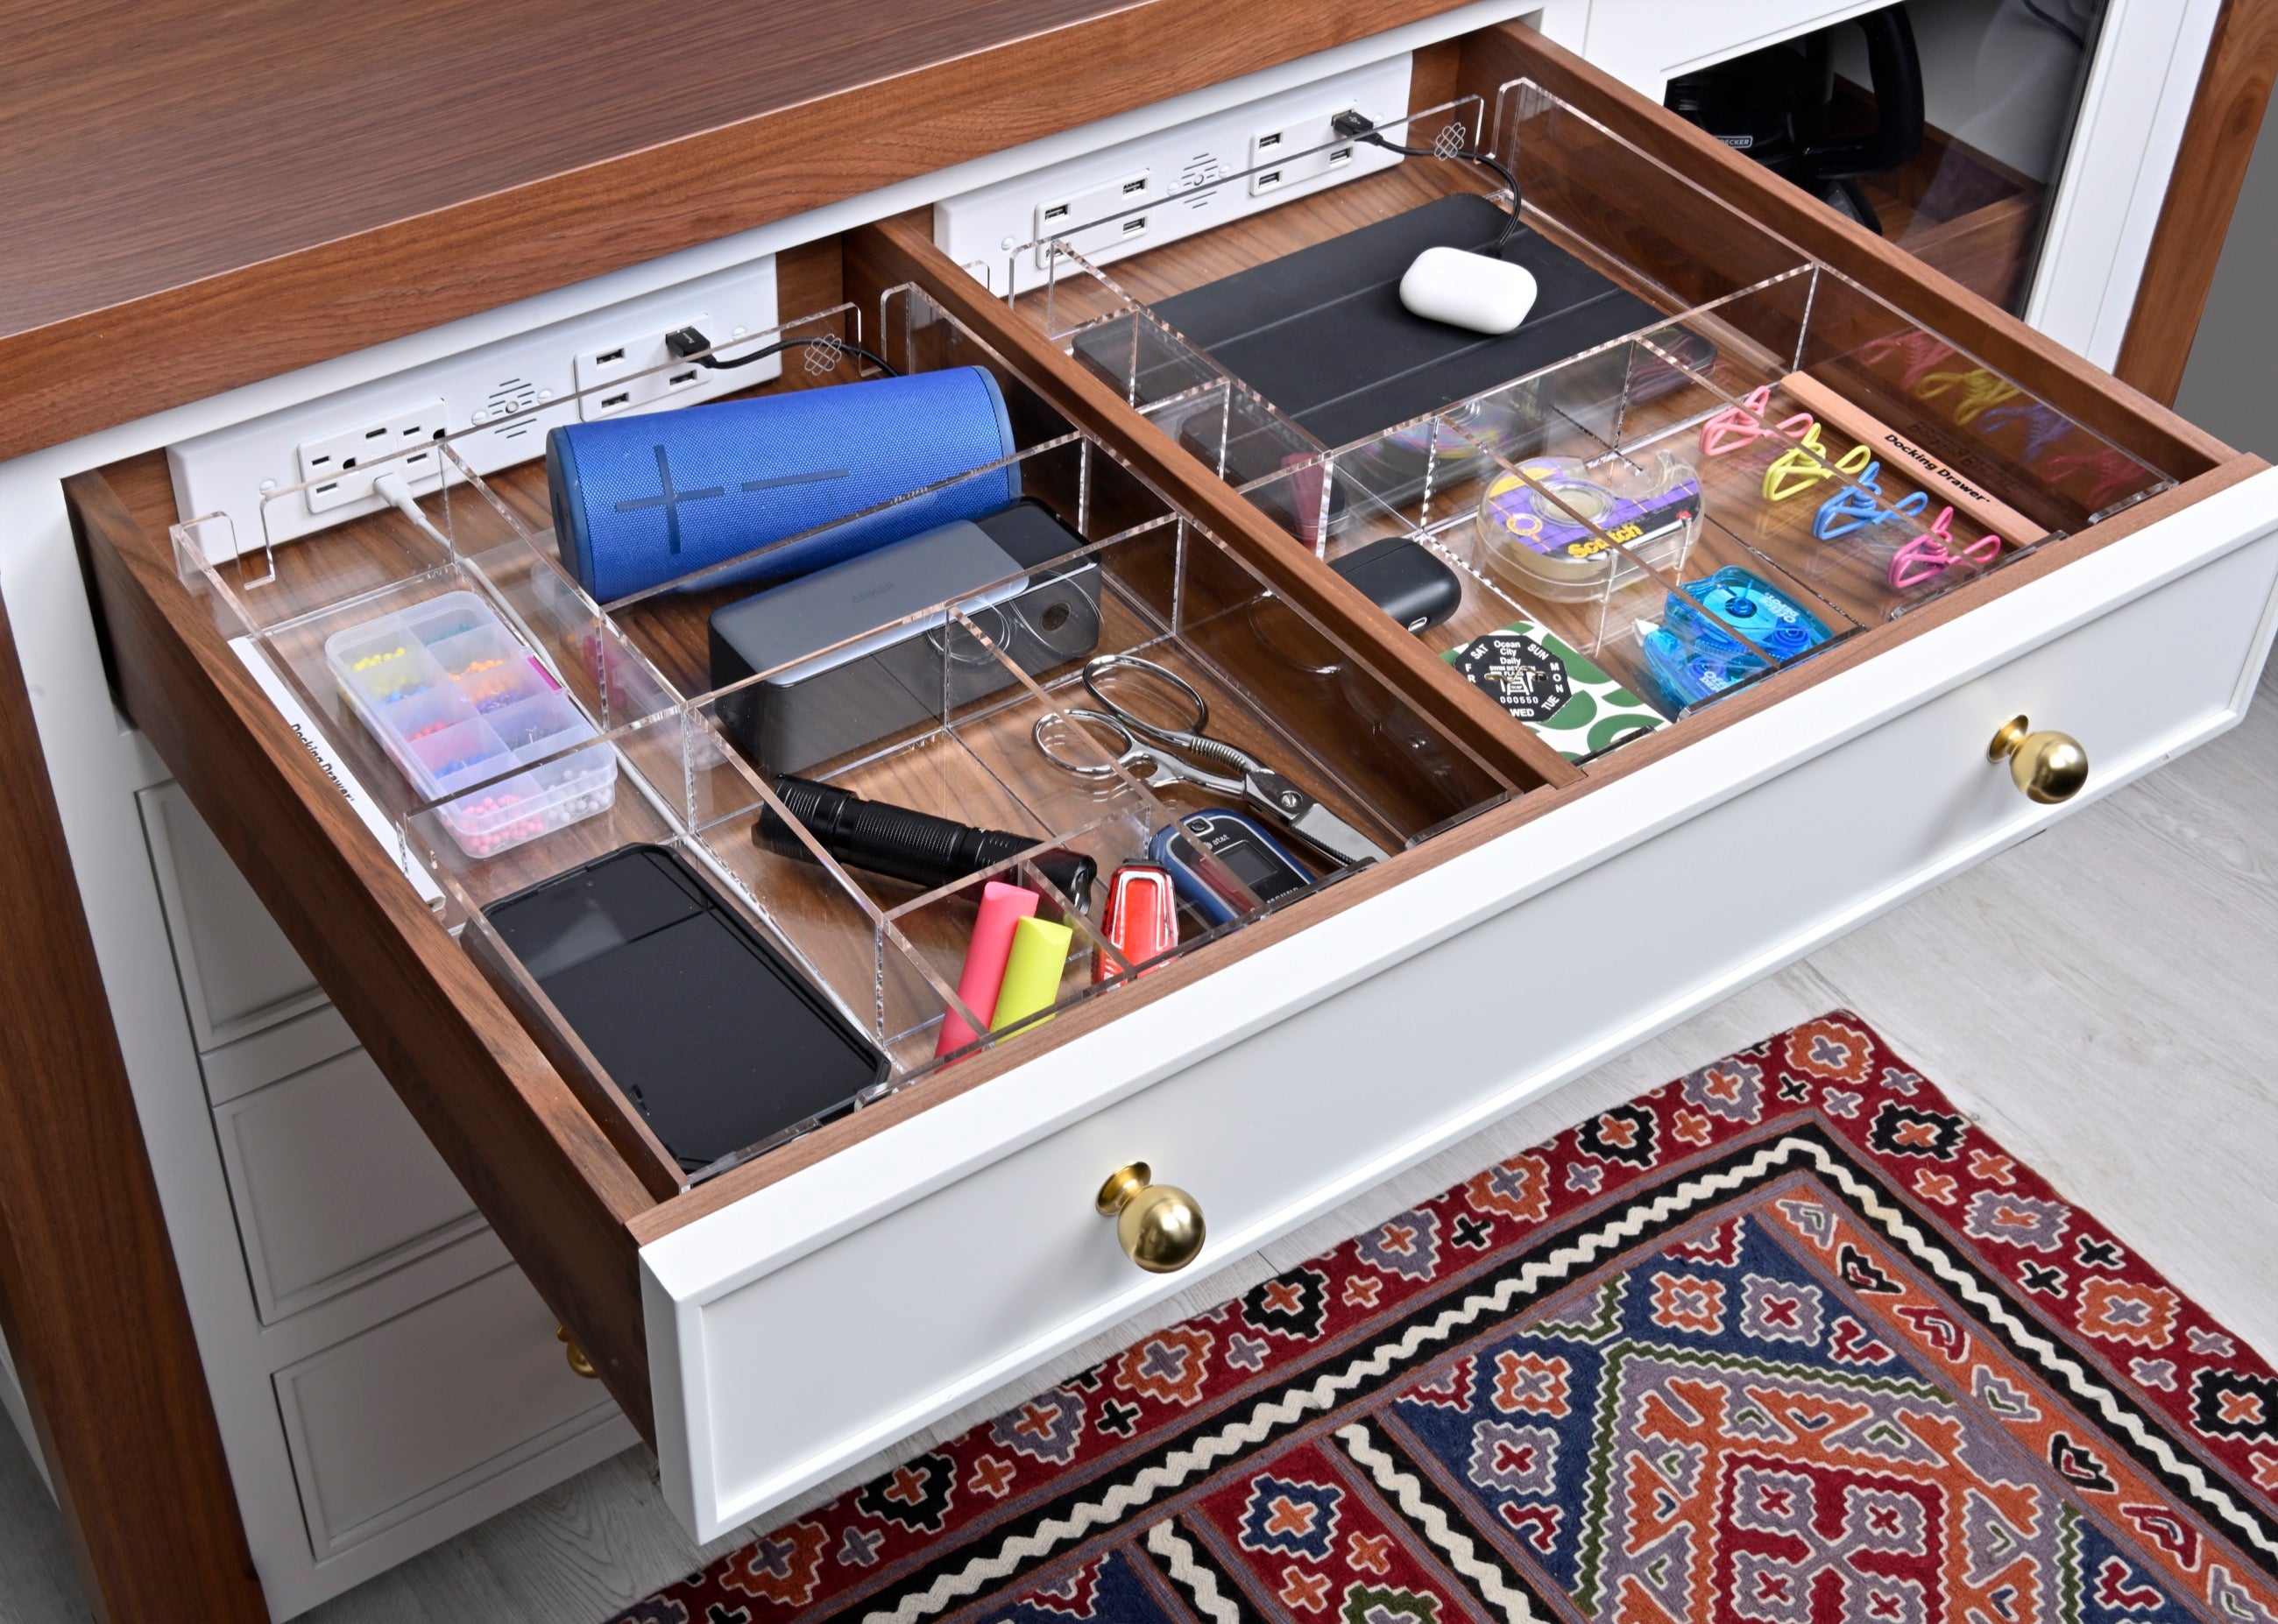 Tech drawers with acrylic custom-fit organizers that leave space for charging cords in back.